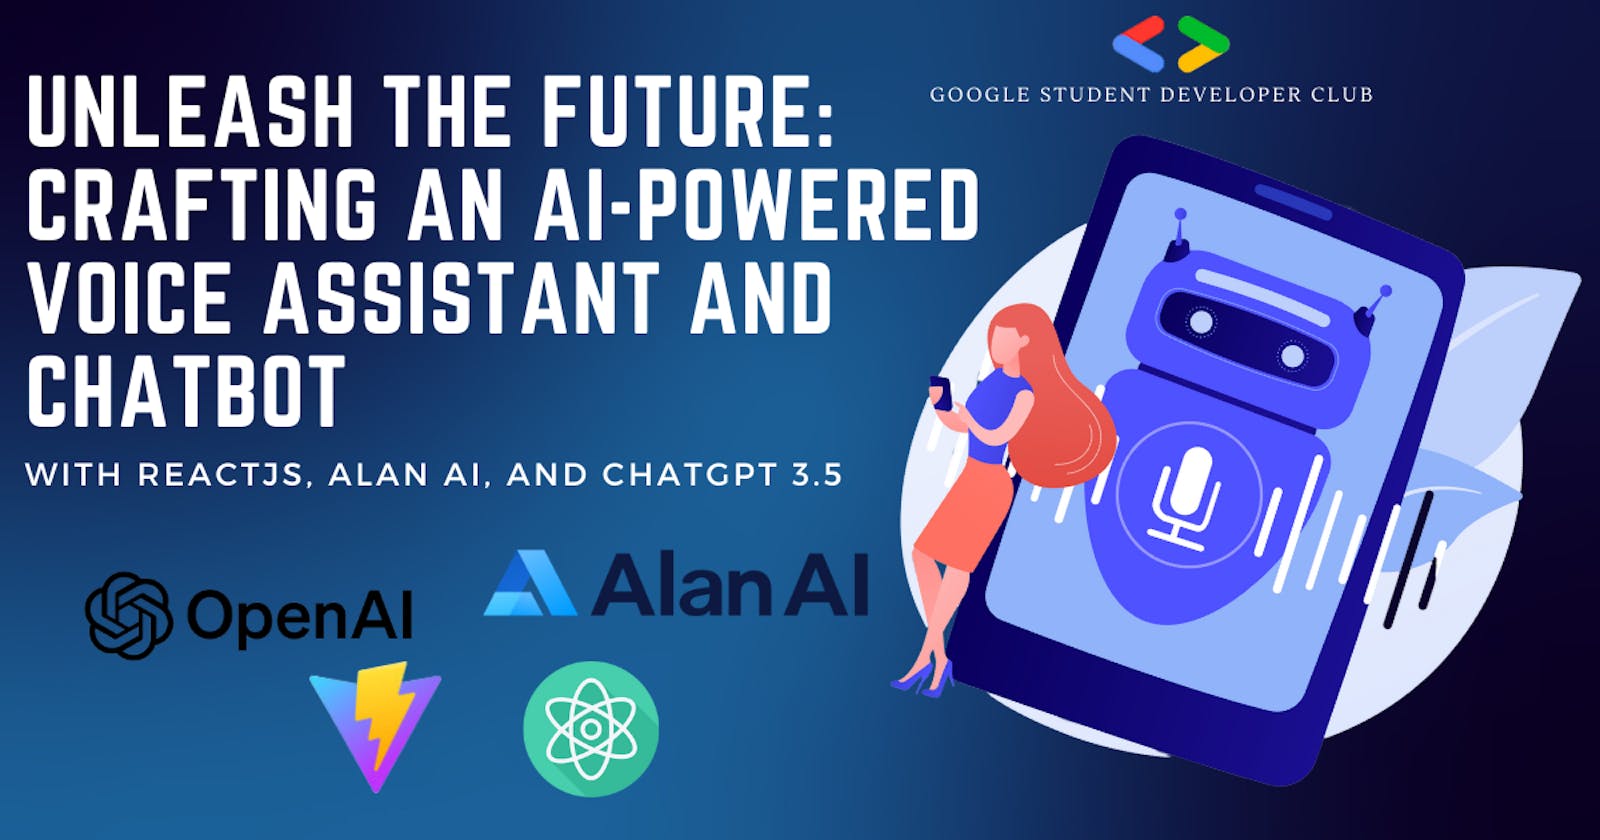 Unleash the Future: Crafting an AI-Powered Voice Assistant and Chatbot with ReactJS, Alan AI, and ChatGPT 3.5